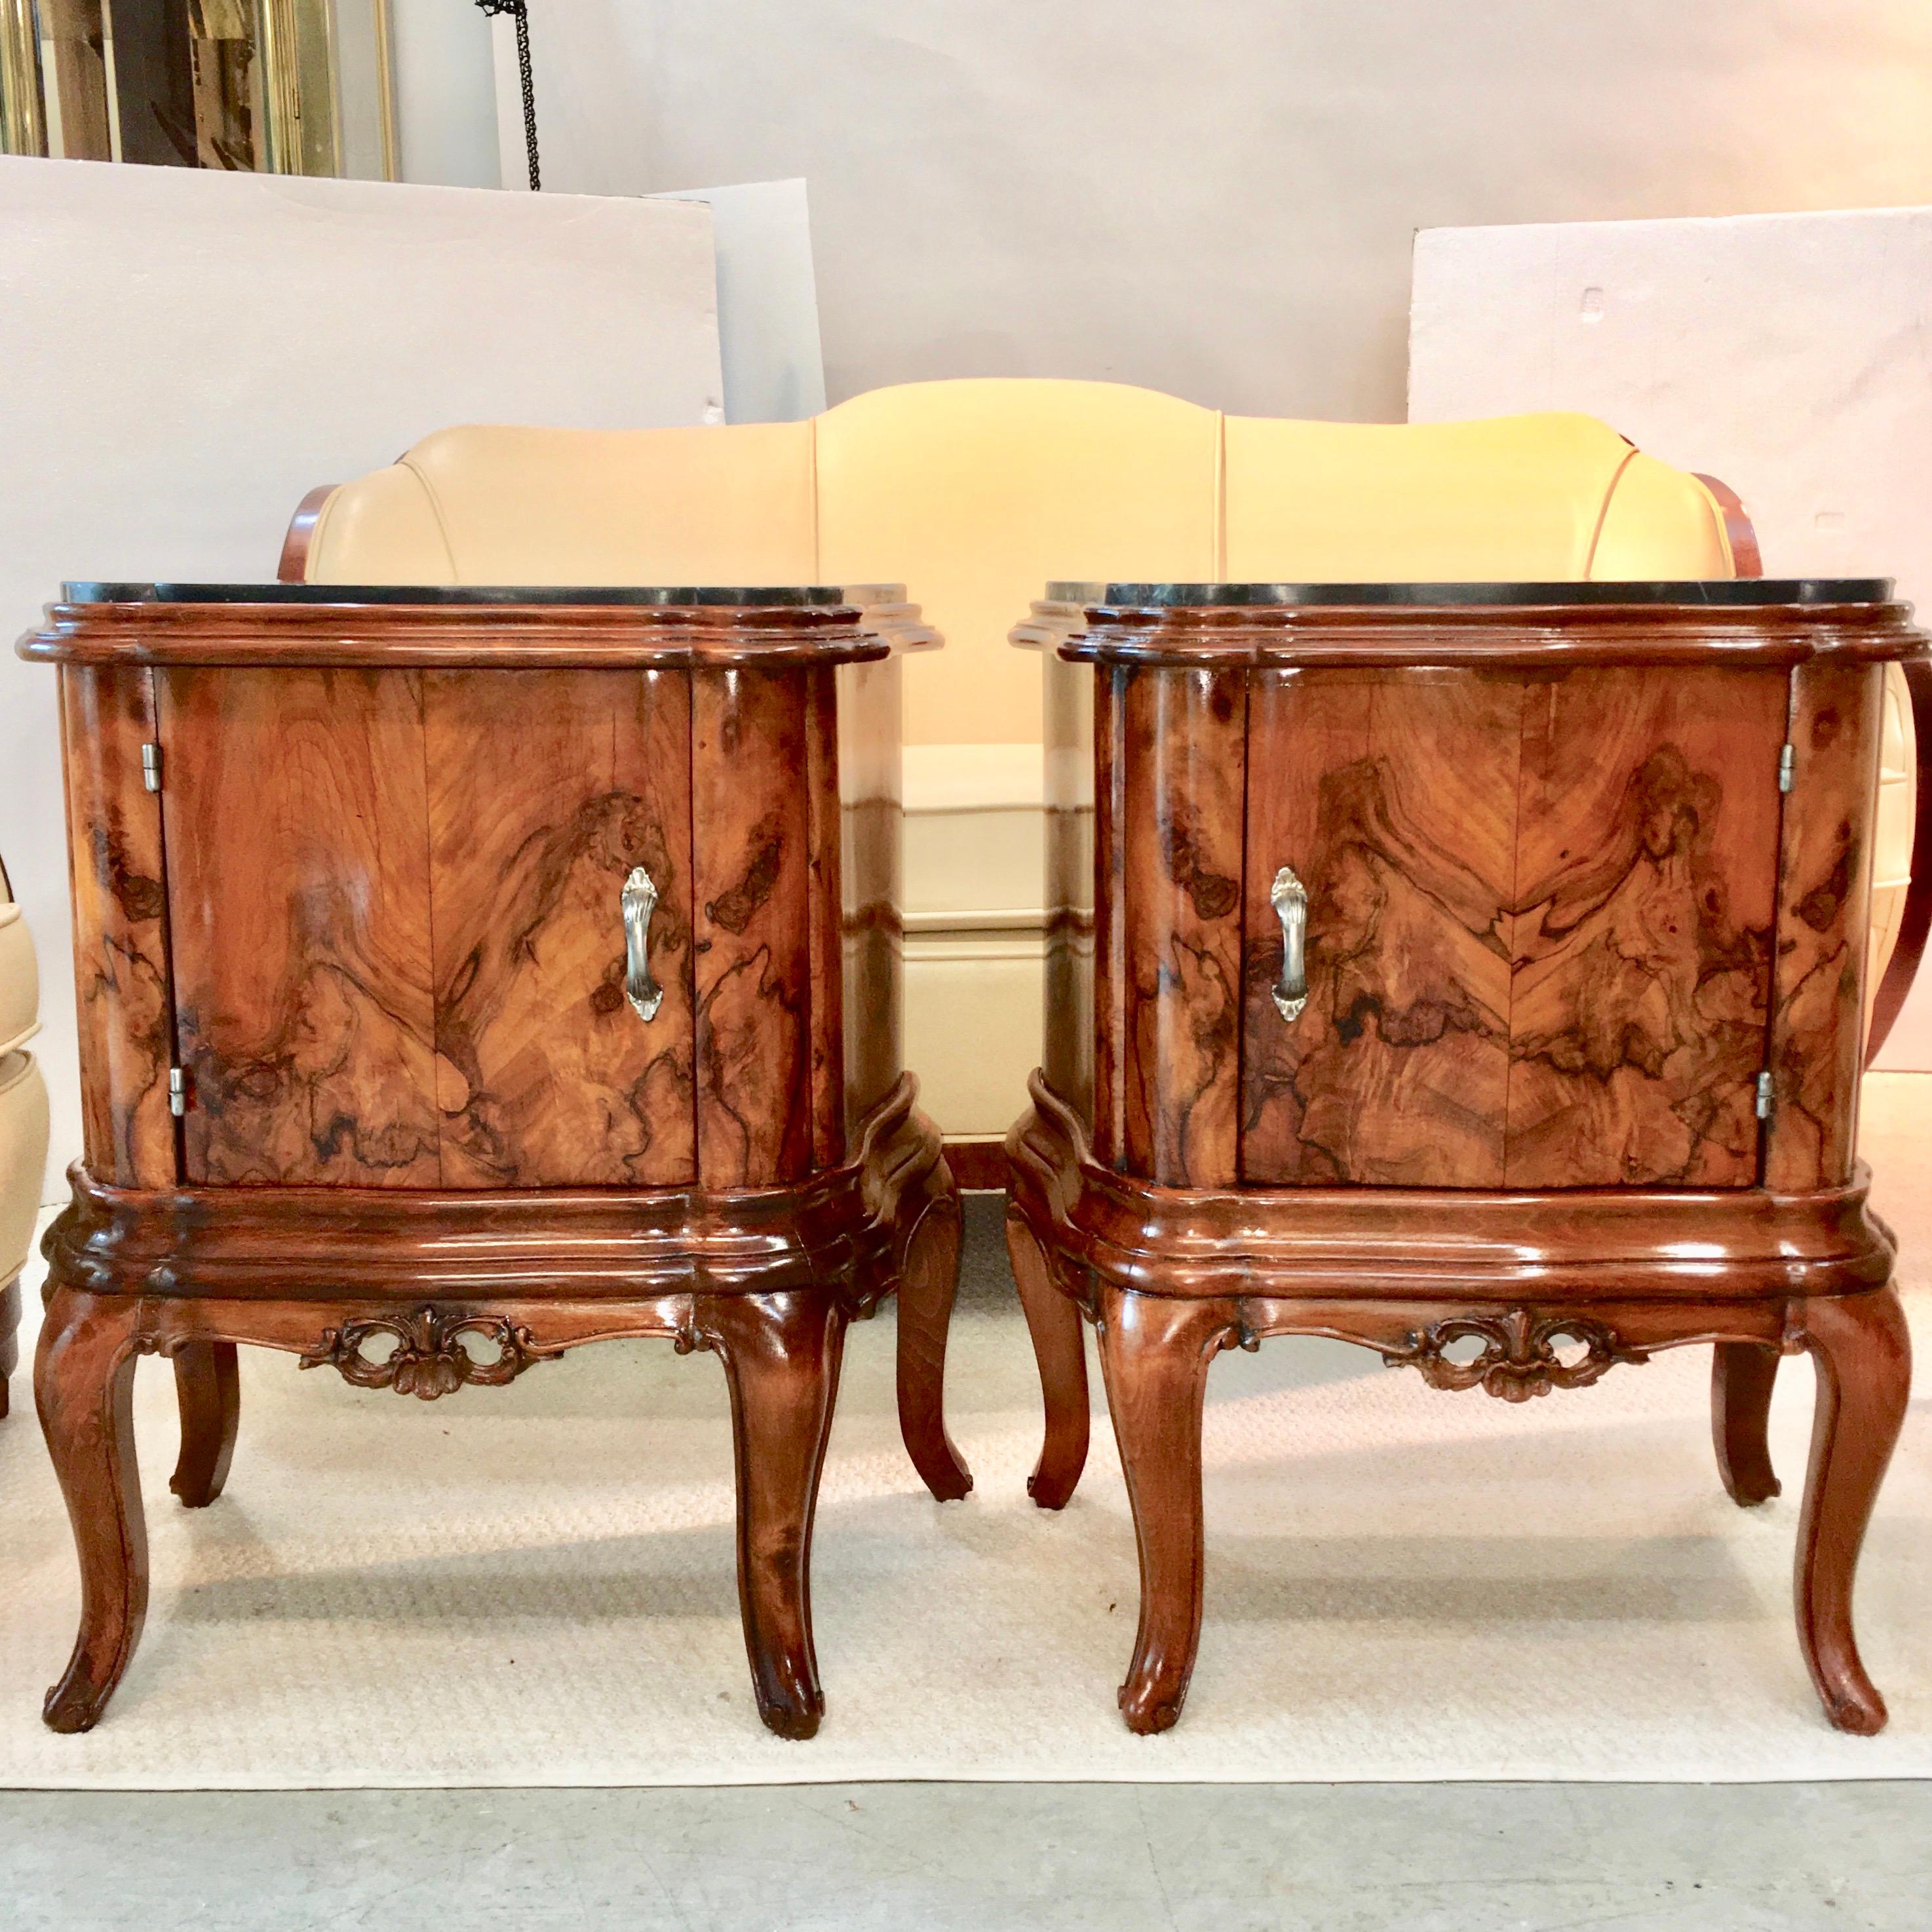 Pair of Italian figured walnut serpentine form bedside commodes with marble tops and single cabinet doors. Single shelf inside cabinet.
Beautifully restored and polished.
One has label 